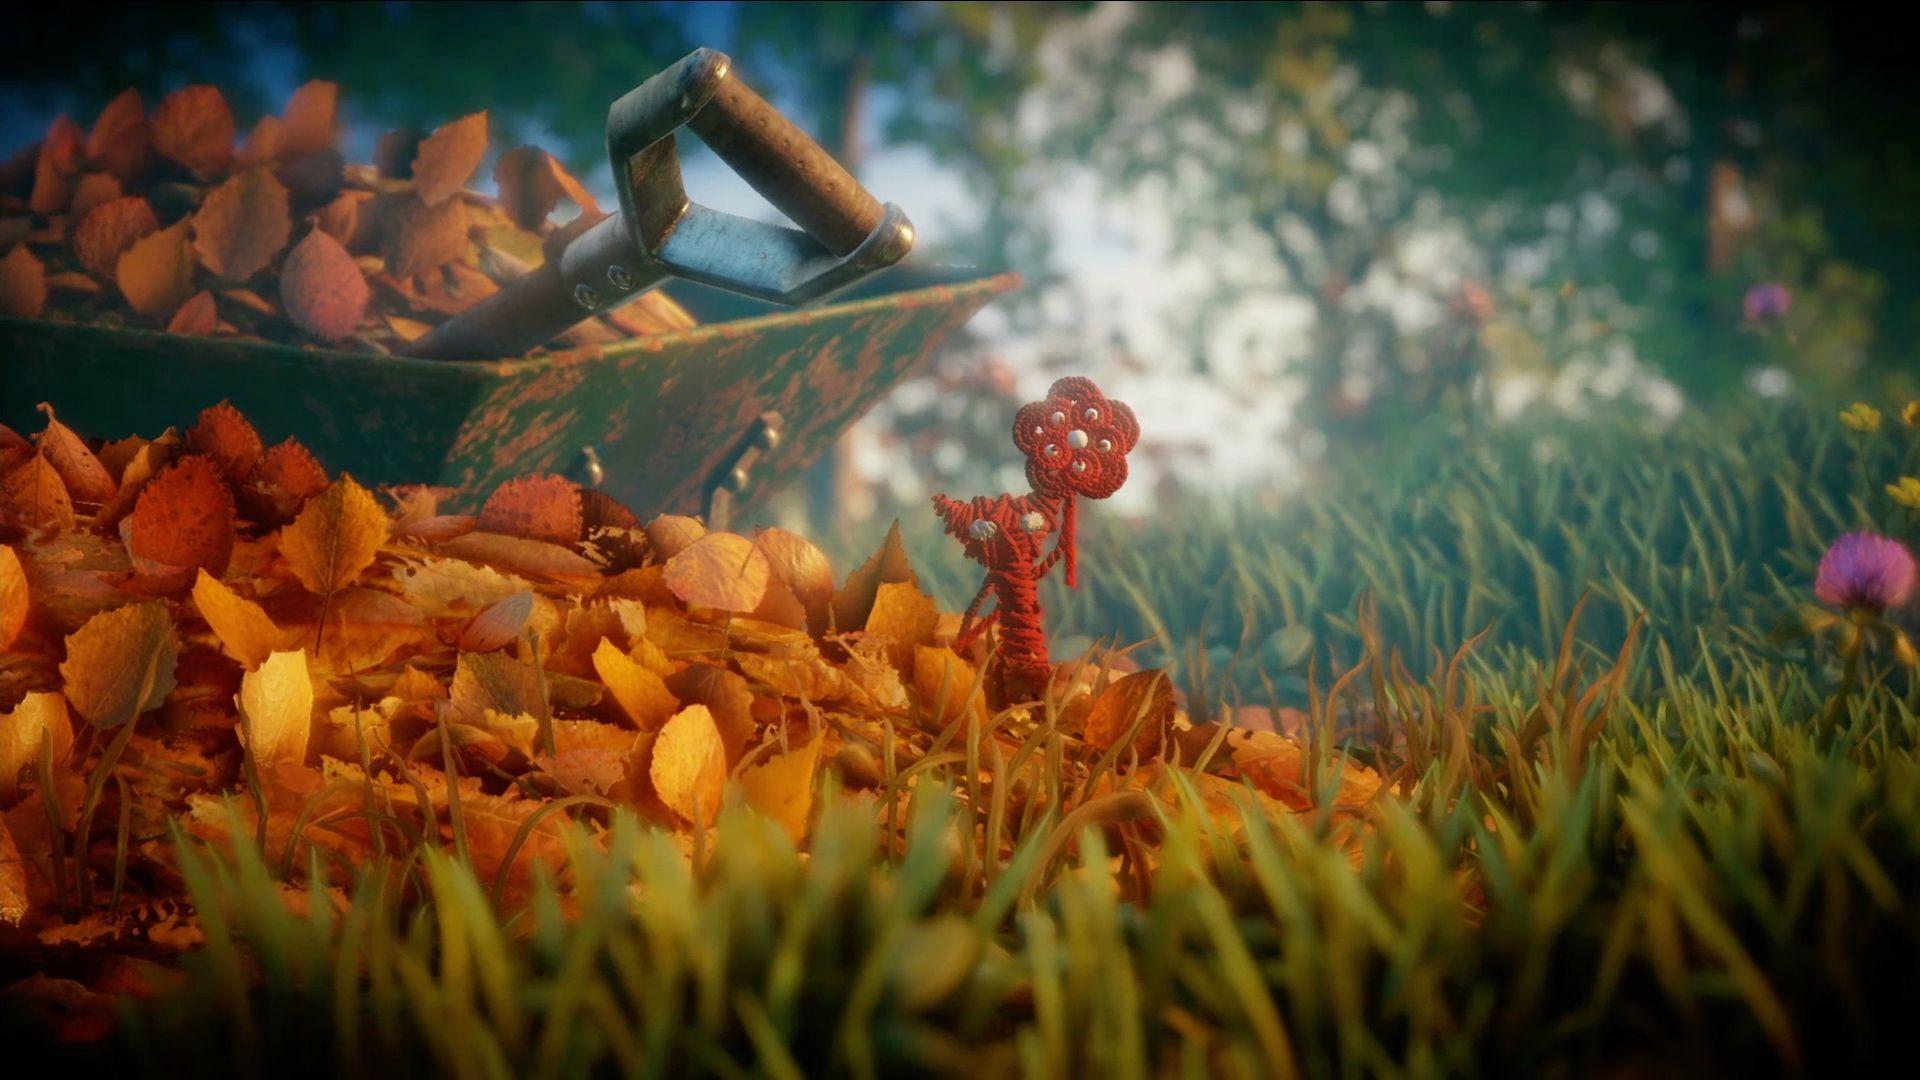 3840x2160 / 3840x2160 Unravel Two wallpaper JPG - Coolwallpapers.me!